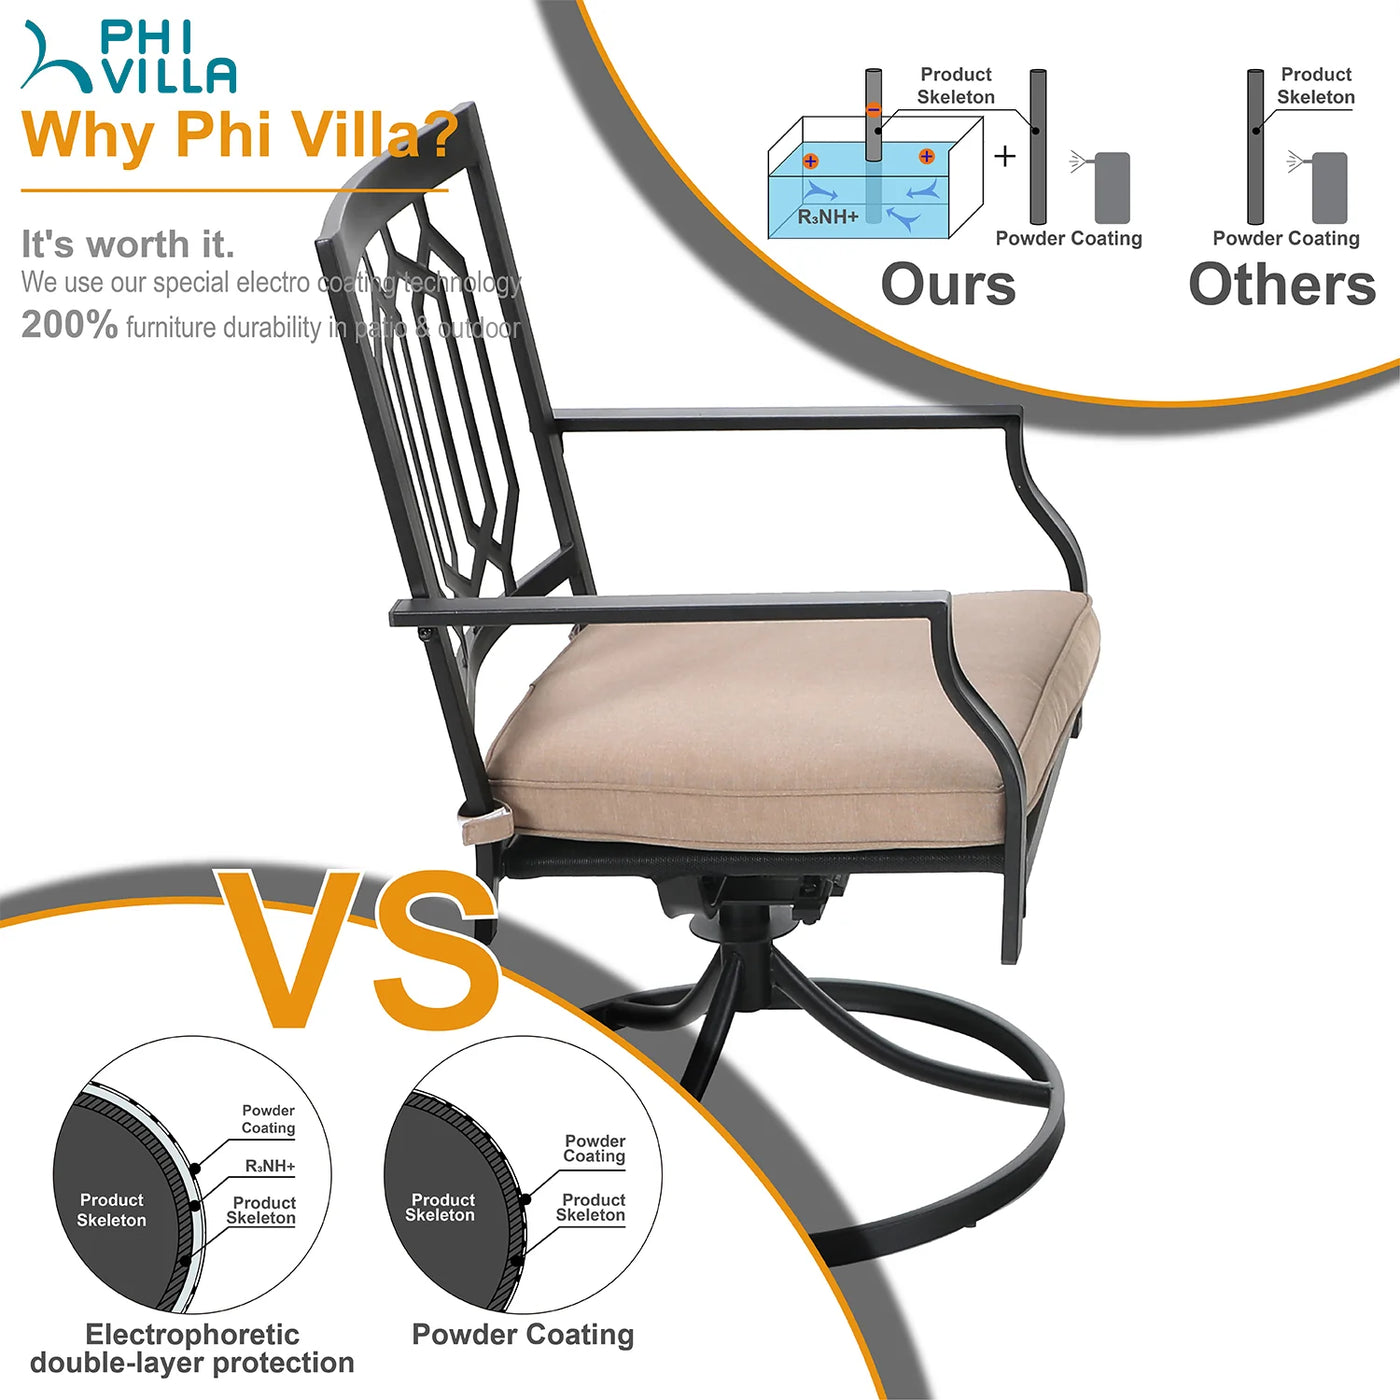 Phi Villa Outdoor Metal Dining Chairs fits Garden Backyard Chairs Furniture - Set of 2 - $235